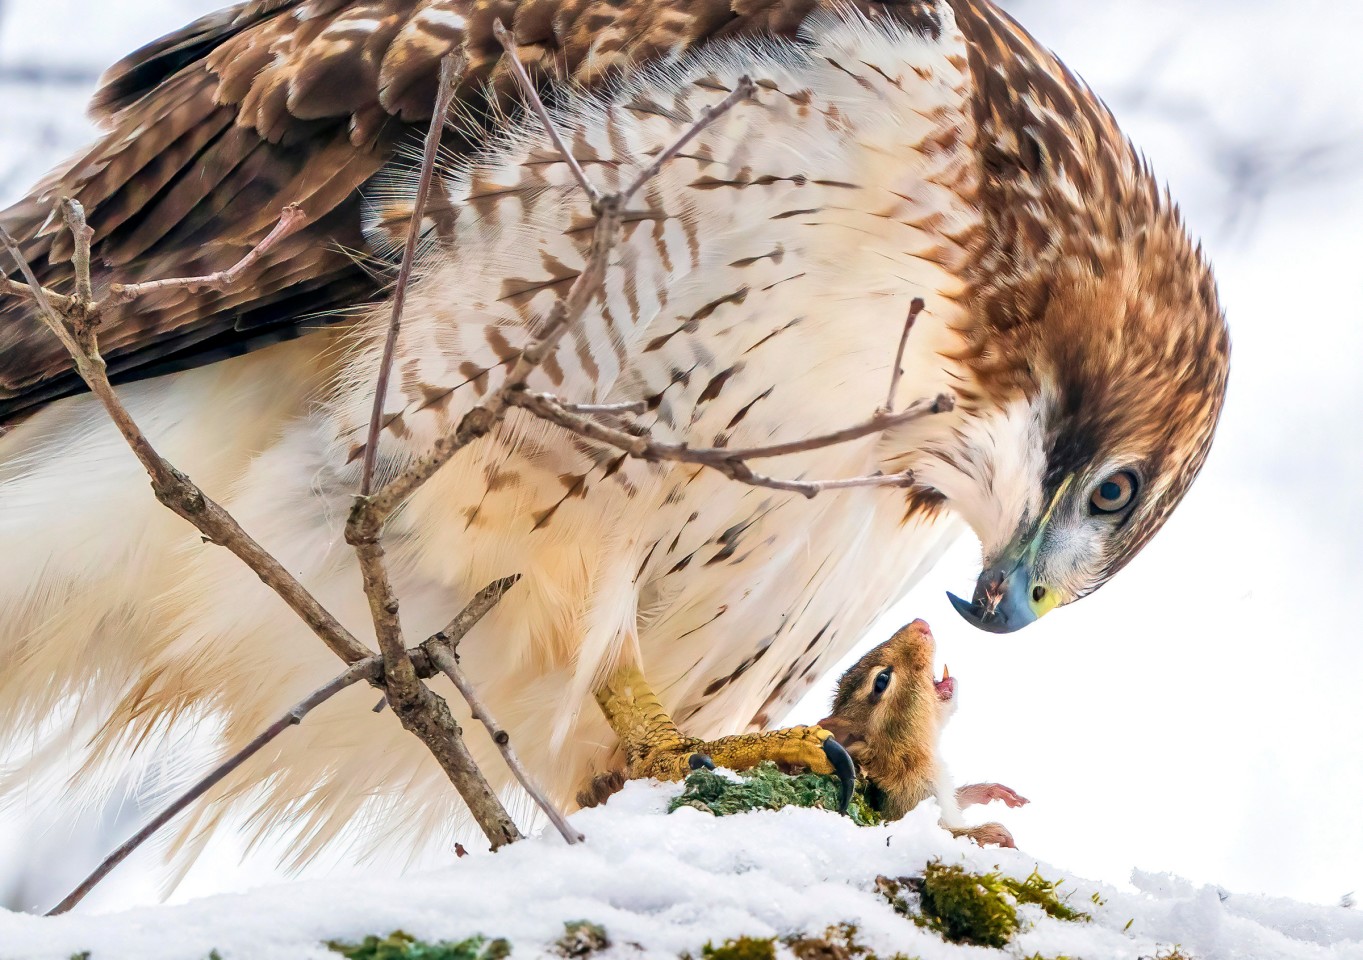 A Red-tailed Hawk holds an open-mouthed chipmunk in its yellow talons. Sony a9ii with Sony FE 200- 600mm F5.6-6.3 G OSS lens; 1/2000 second at f/7.1; ISO 3200